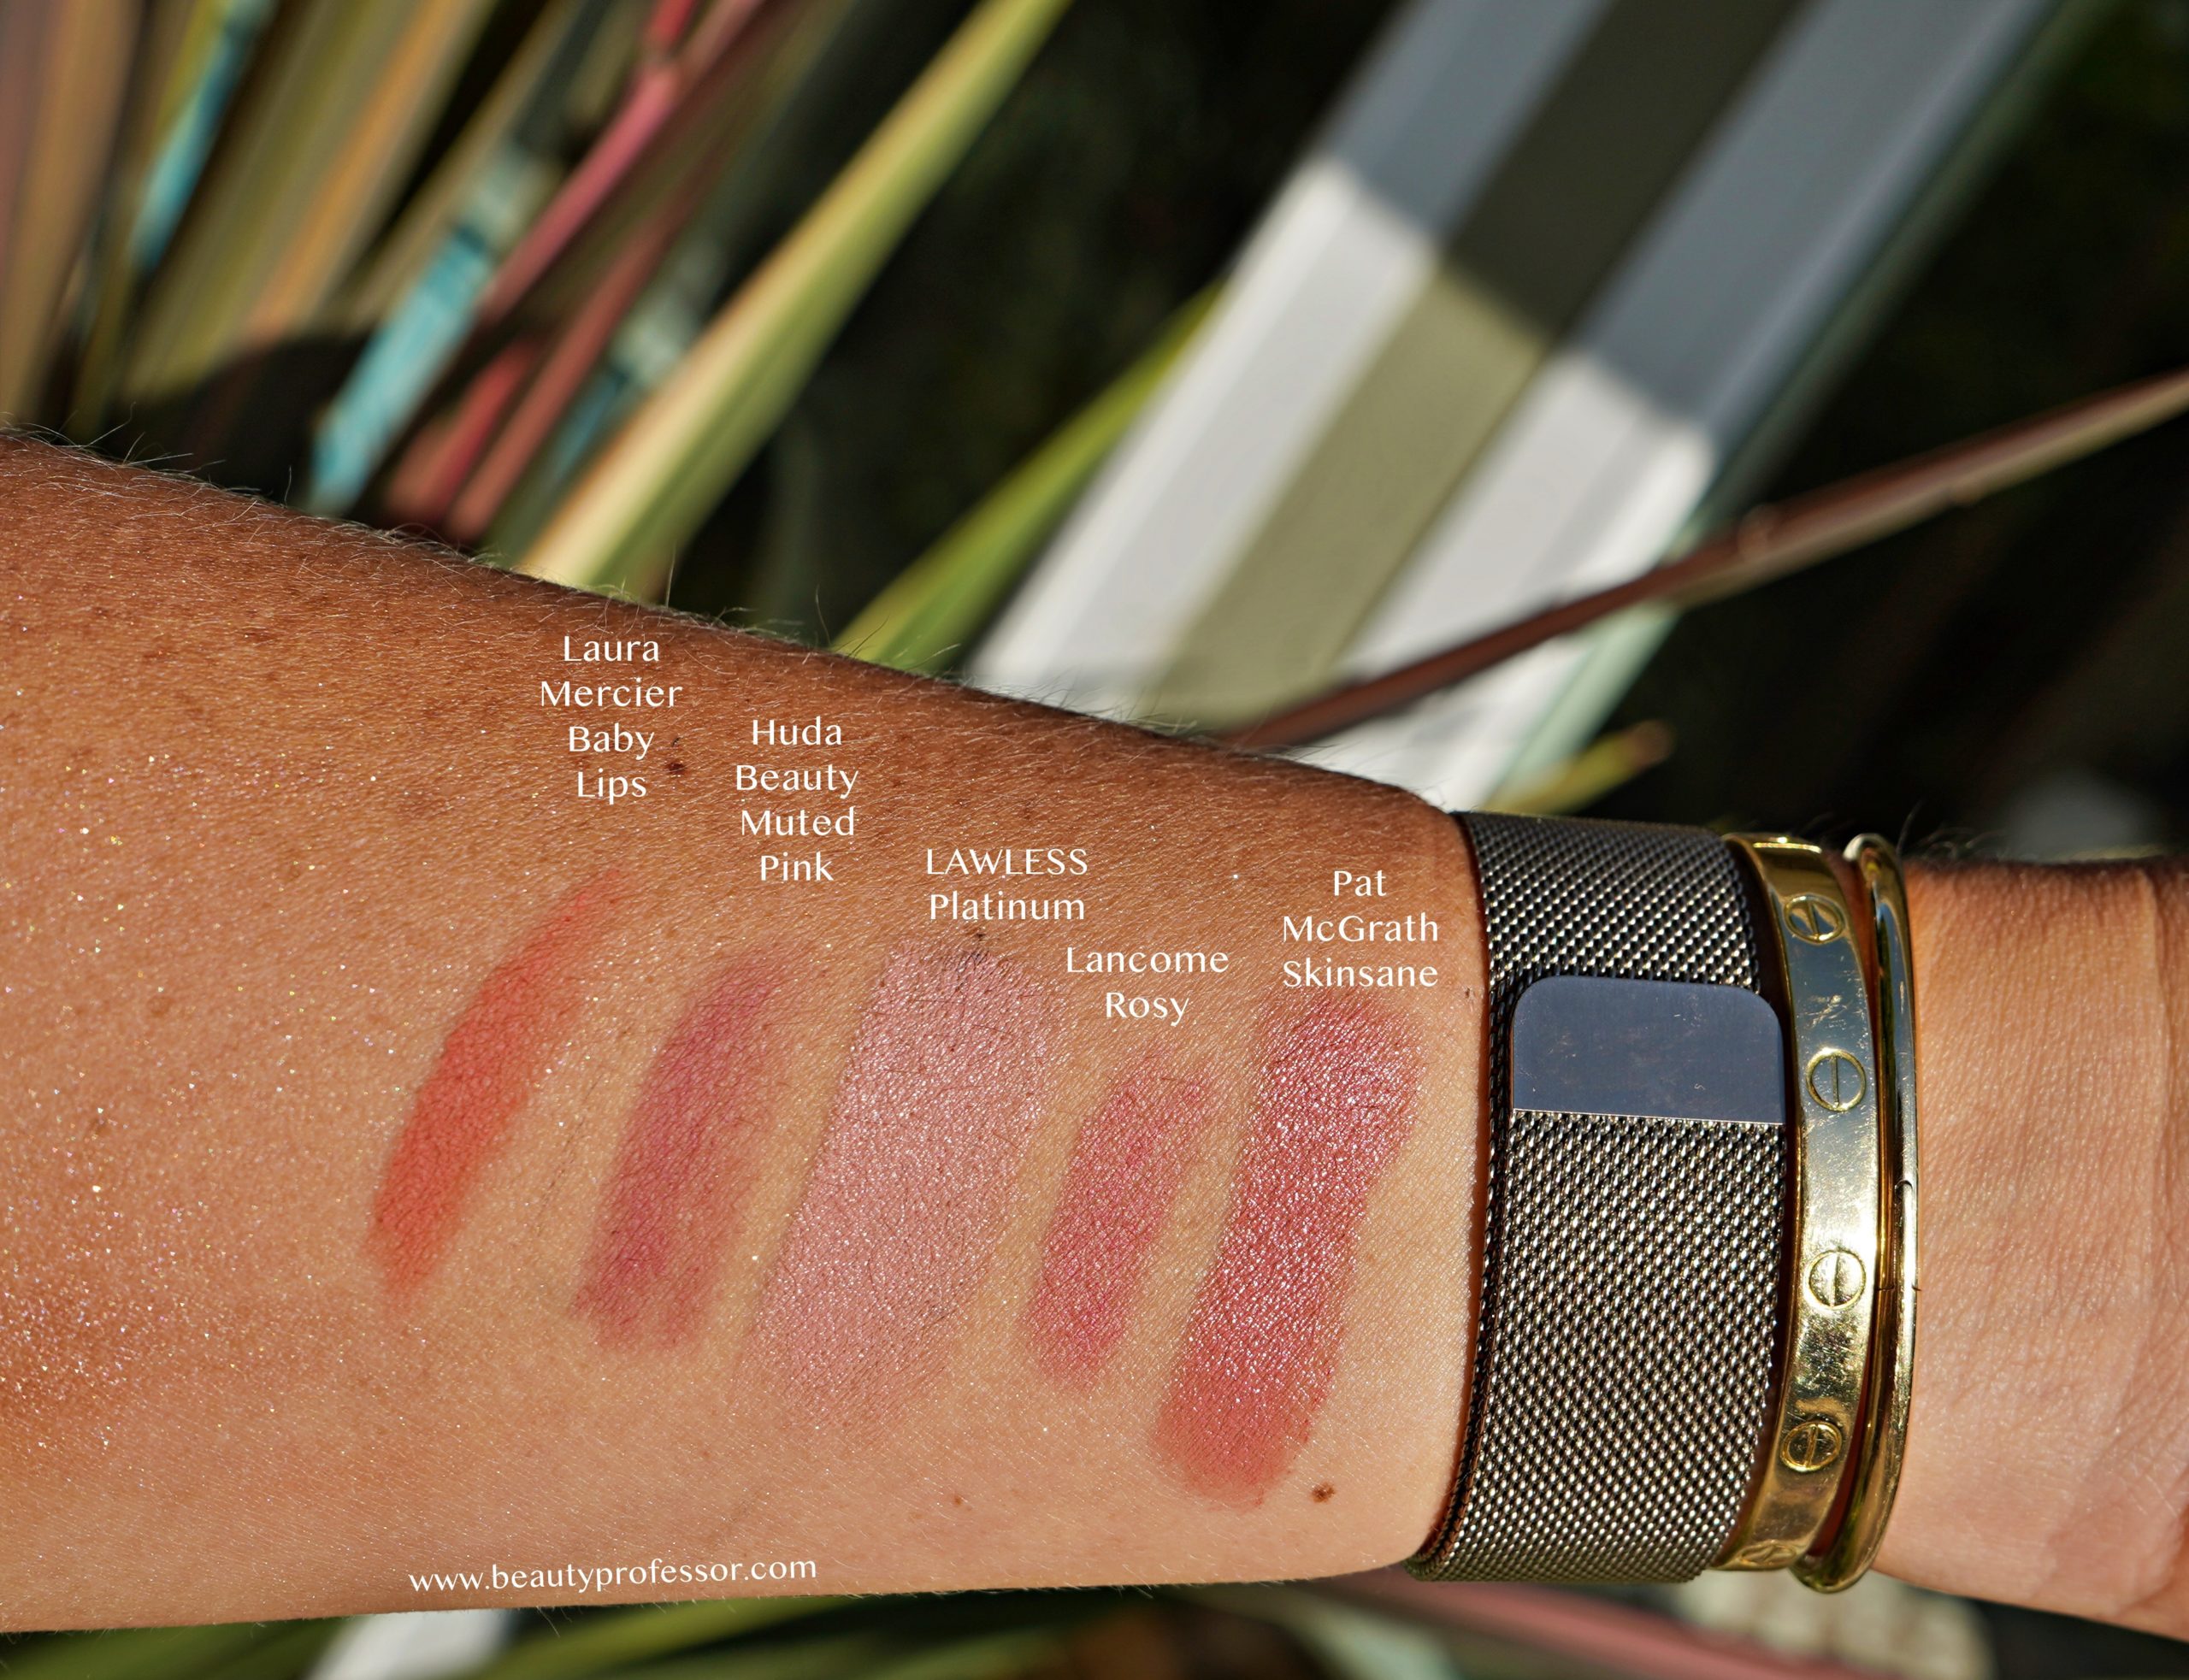 Lipstick Swatches in direct sunlight